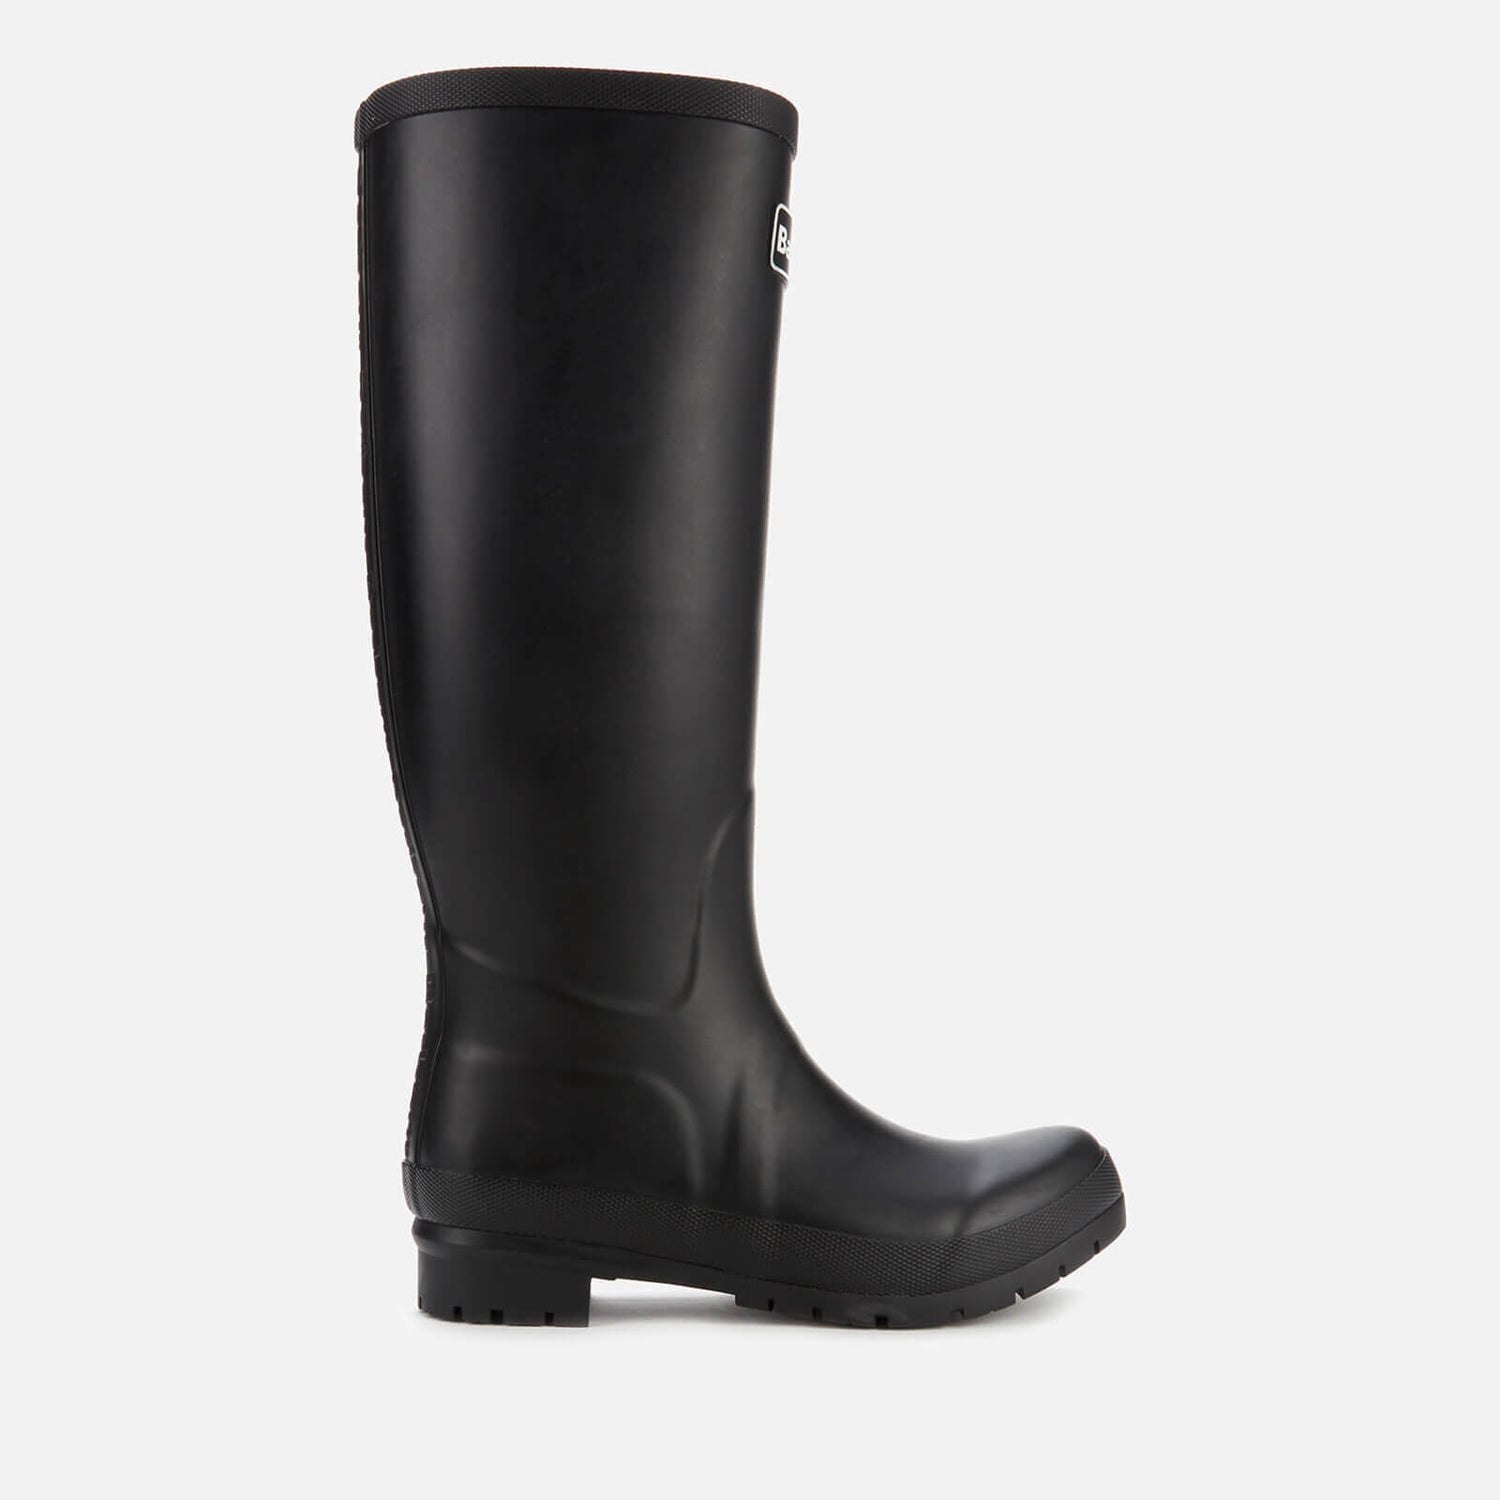 Barbour Women's Abbey Tall Wellies - Black - UK 4